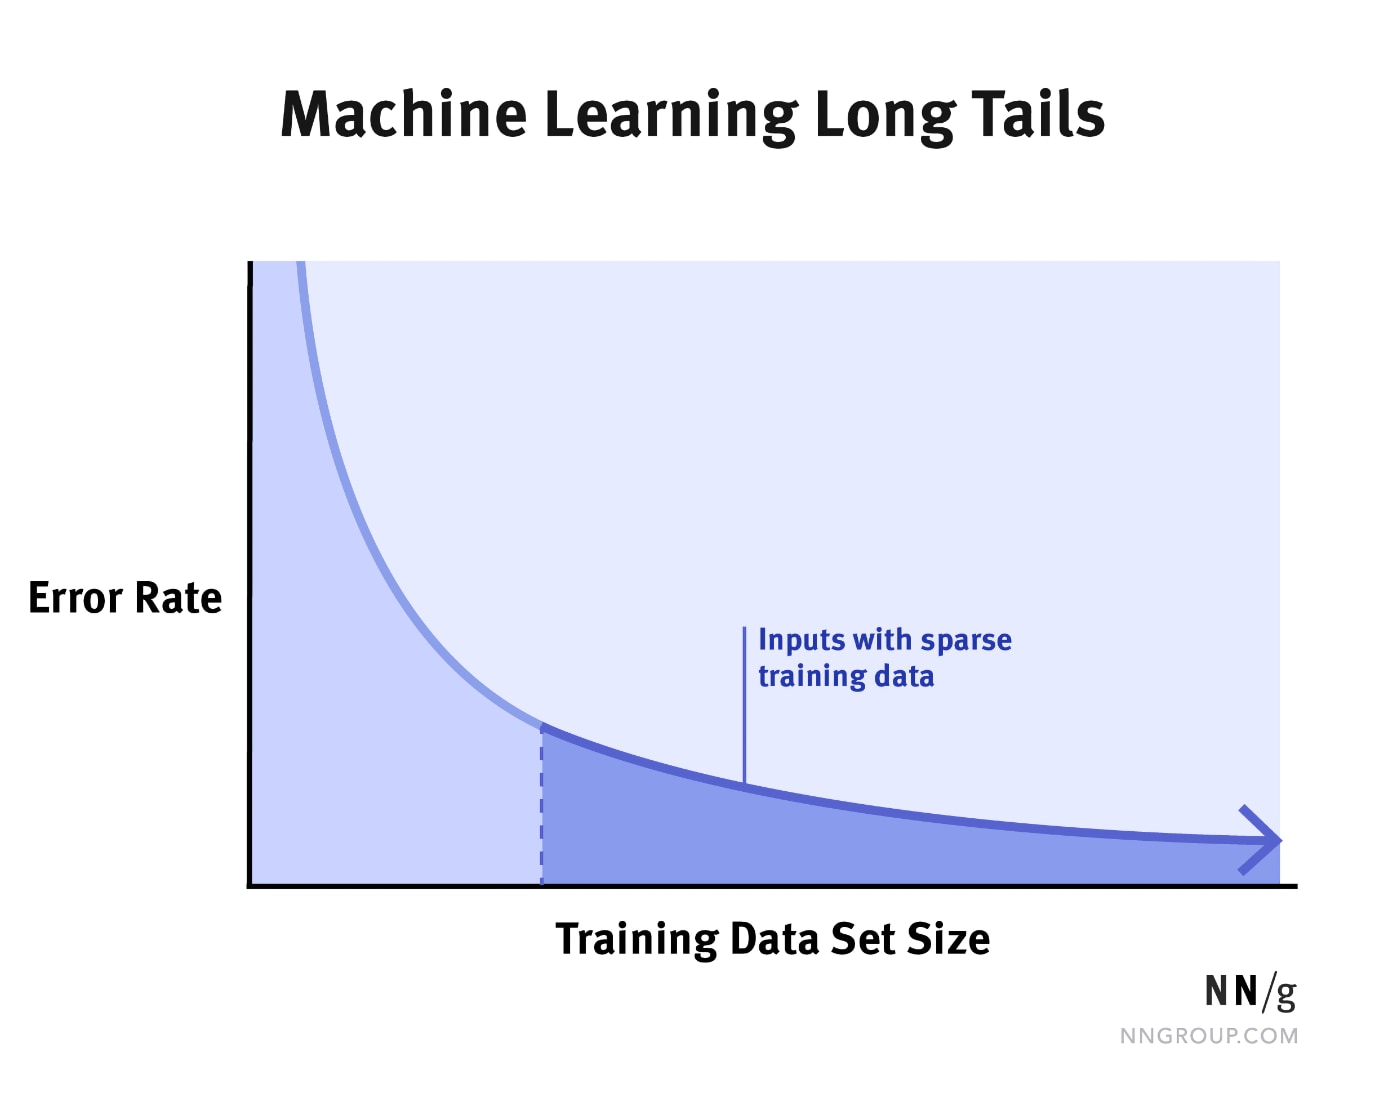 A sharply sloped distribution curve where the X-axis is training data set size and the Y-axis is error rate. The area under the curve's tail is shaded and annotated with "Inputs with sparse training data".